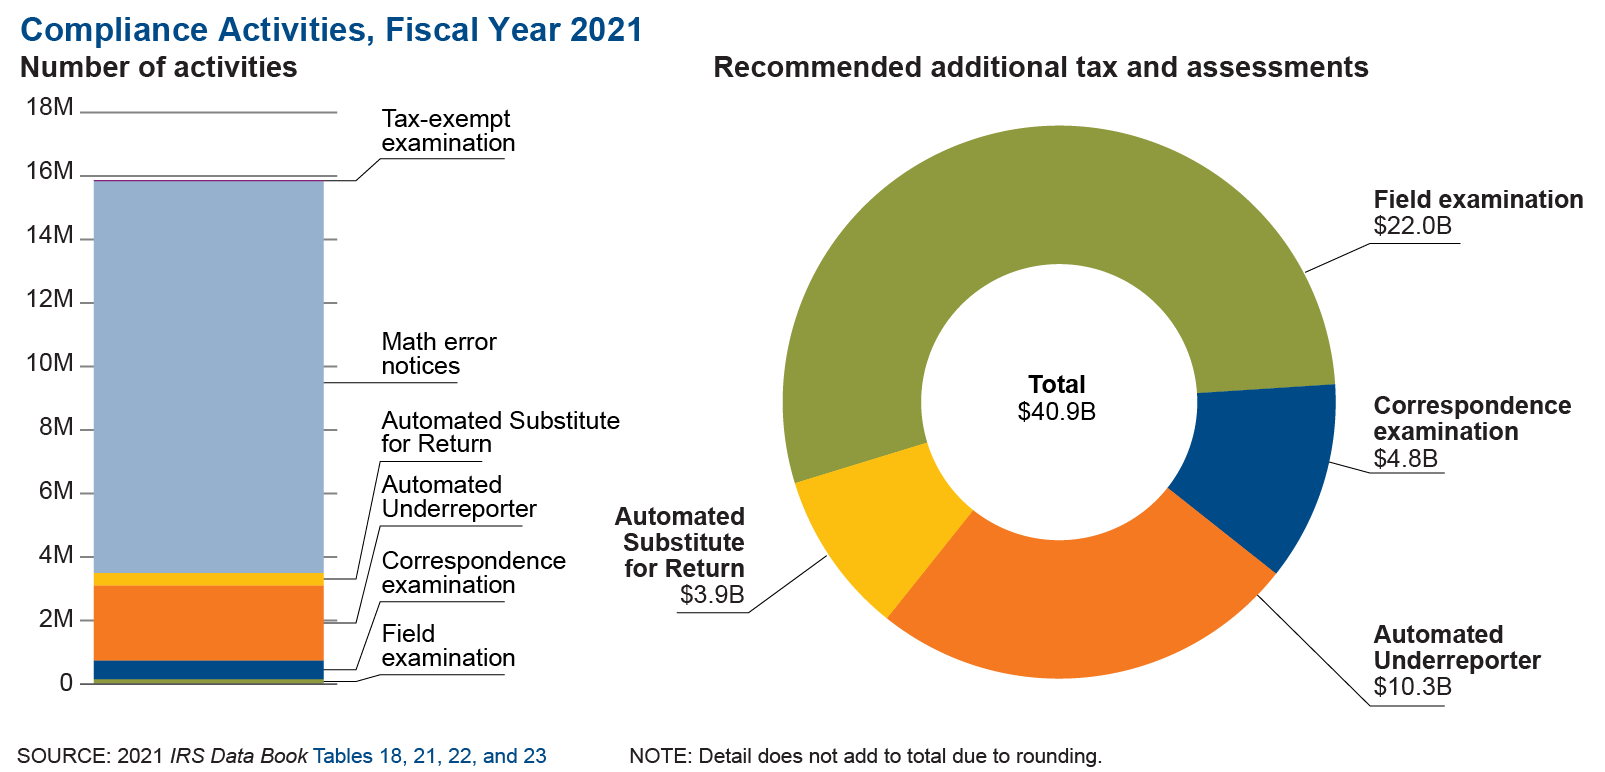 Graphic on the left shows the number of compliance activities completed during fiscal year 2021. The IRS completed 15.8 million compliance activities, including sending more than 12 million math error notices. Graphic on the right shows the amount of recommended additional tax and assessments for fiscal year 2021, totaling $40.9 billion. Field exams accounted for $22 billion of this total. 